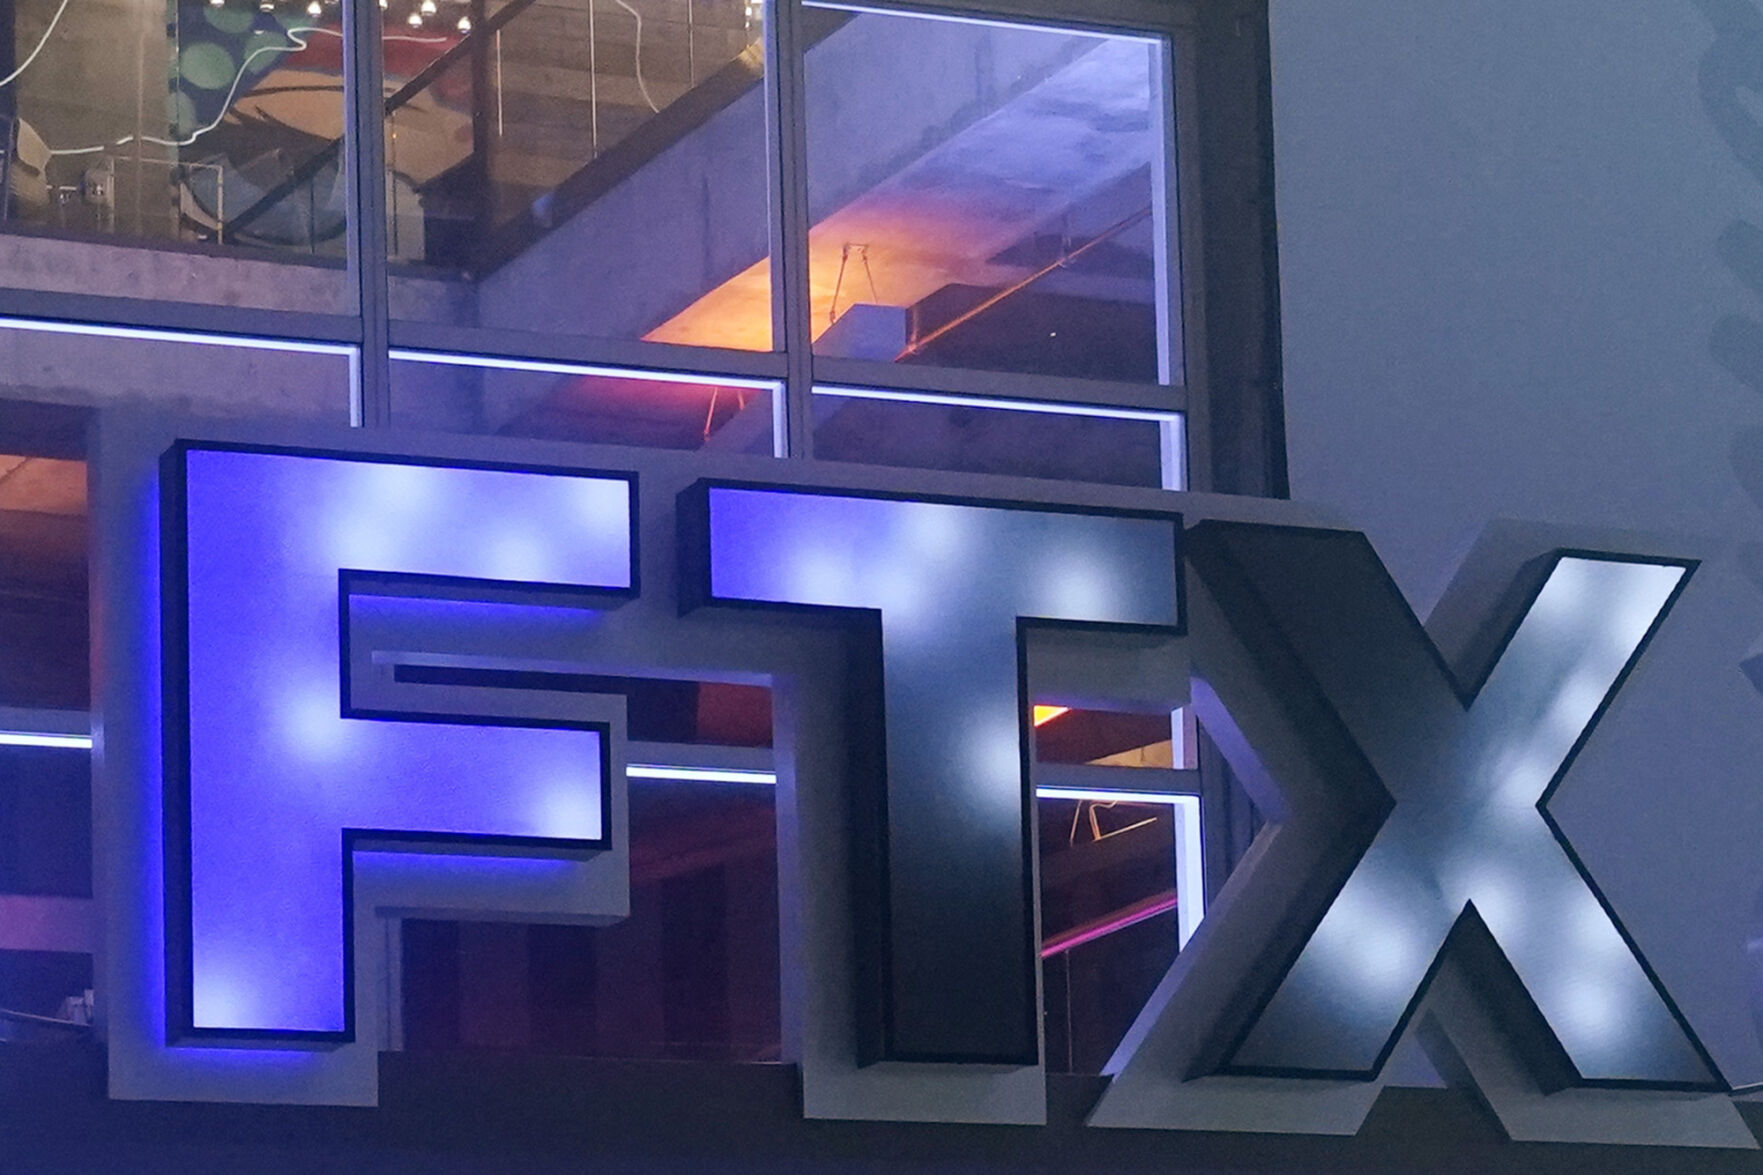 <p>FILE - The FTX Arena logo is seen where the Miami Heat basketball team plays on Nov. 12, 2022, in Miami. The former CEO of failed crypto firm FTX Sam Bankman-Fried has been arrested in the Bahamas at the request of the U.S. government, the U.S. attorney’s office in New York said Monday, Dec. 12. (AP Photo/Marta Lavandier, File)</p>   PHOTO CREDIT: Marta Lavandier 